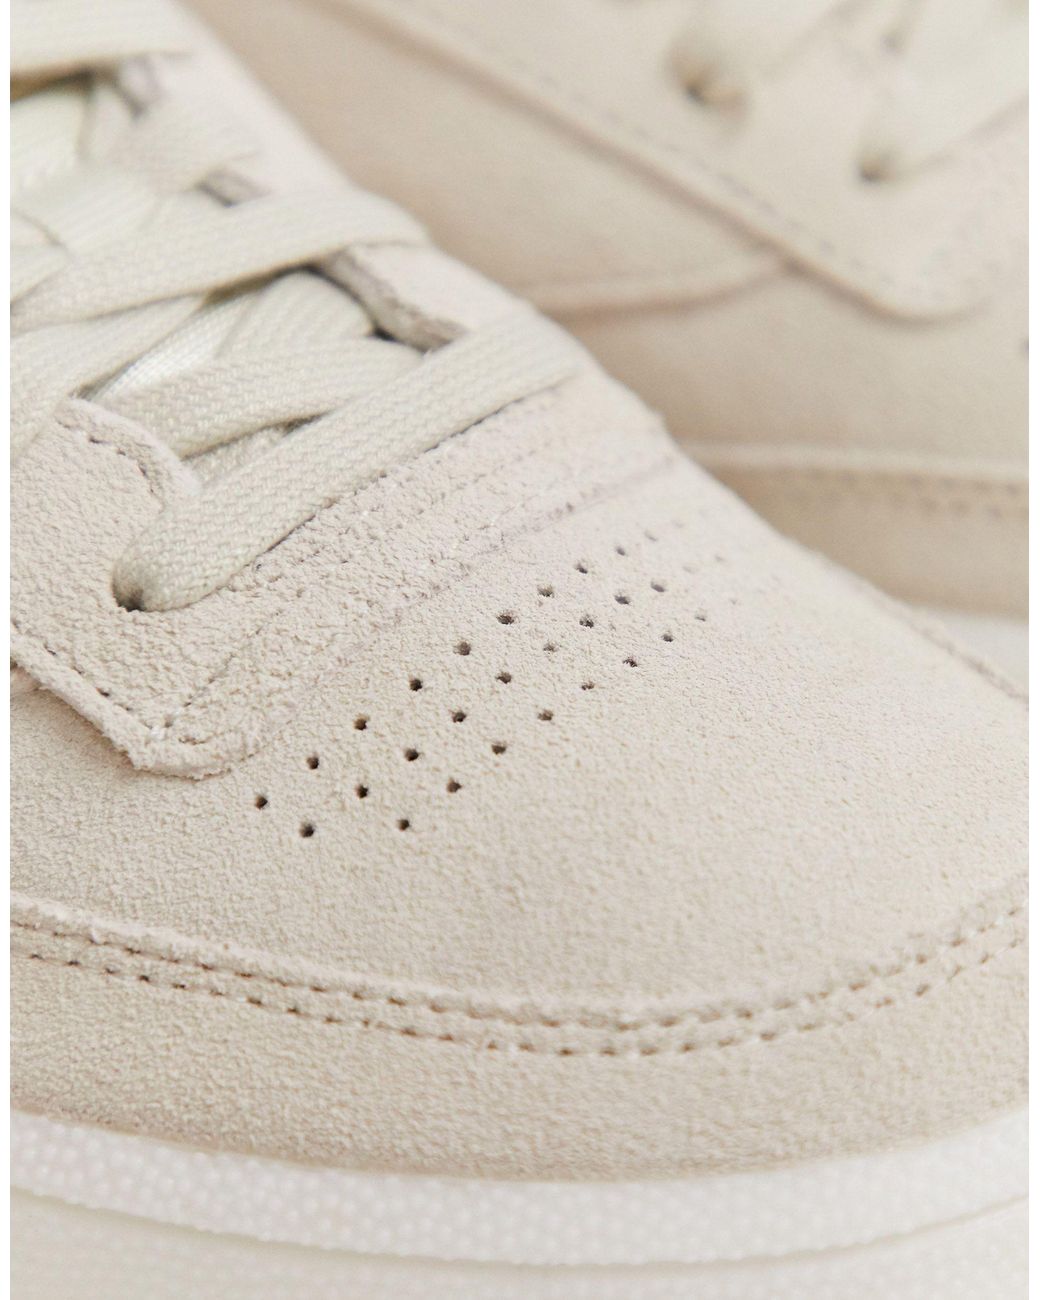 Reebok Exclusive To Asos Suede Club C With Neon Heel Counter-white | Lyst